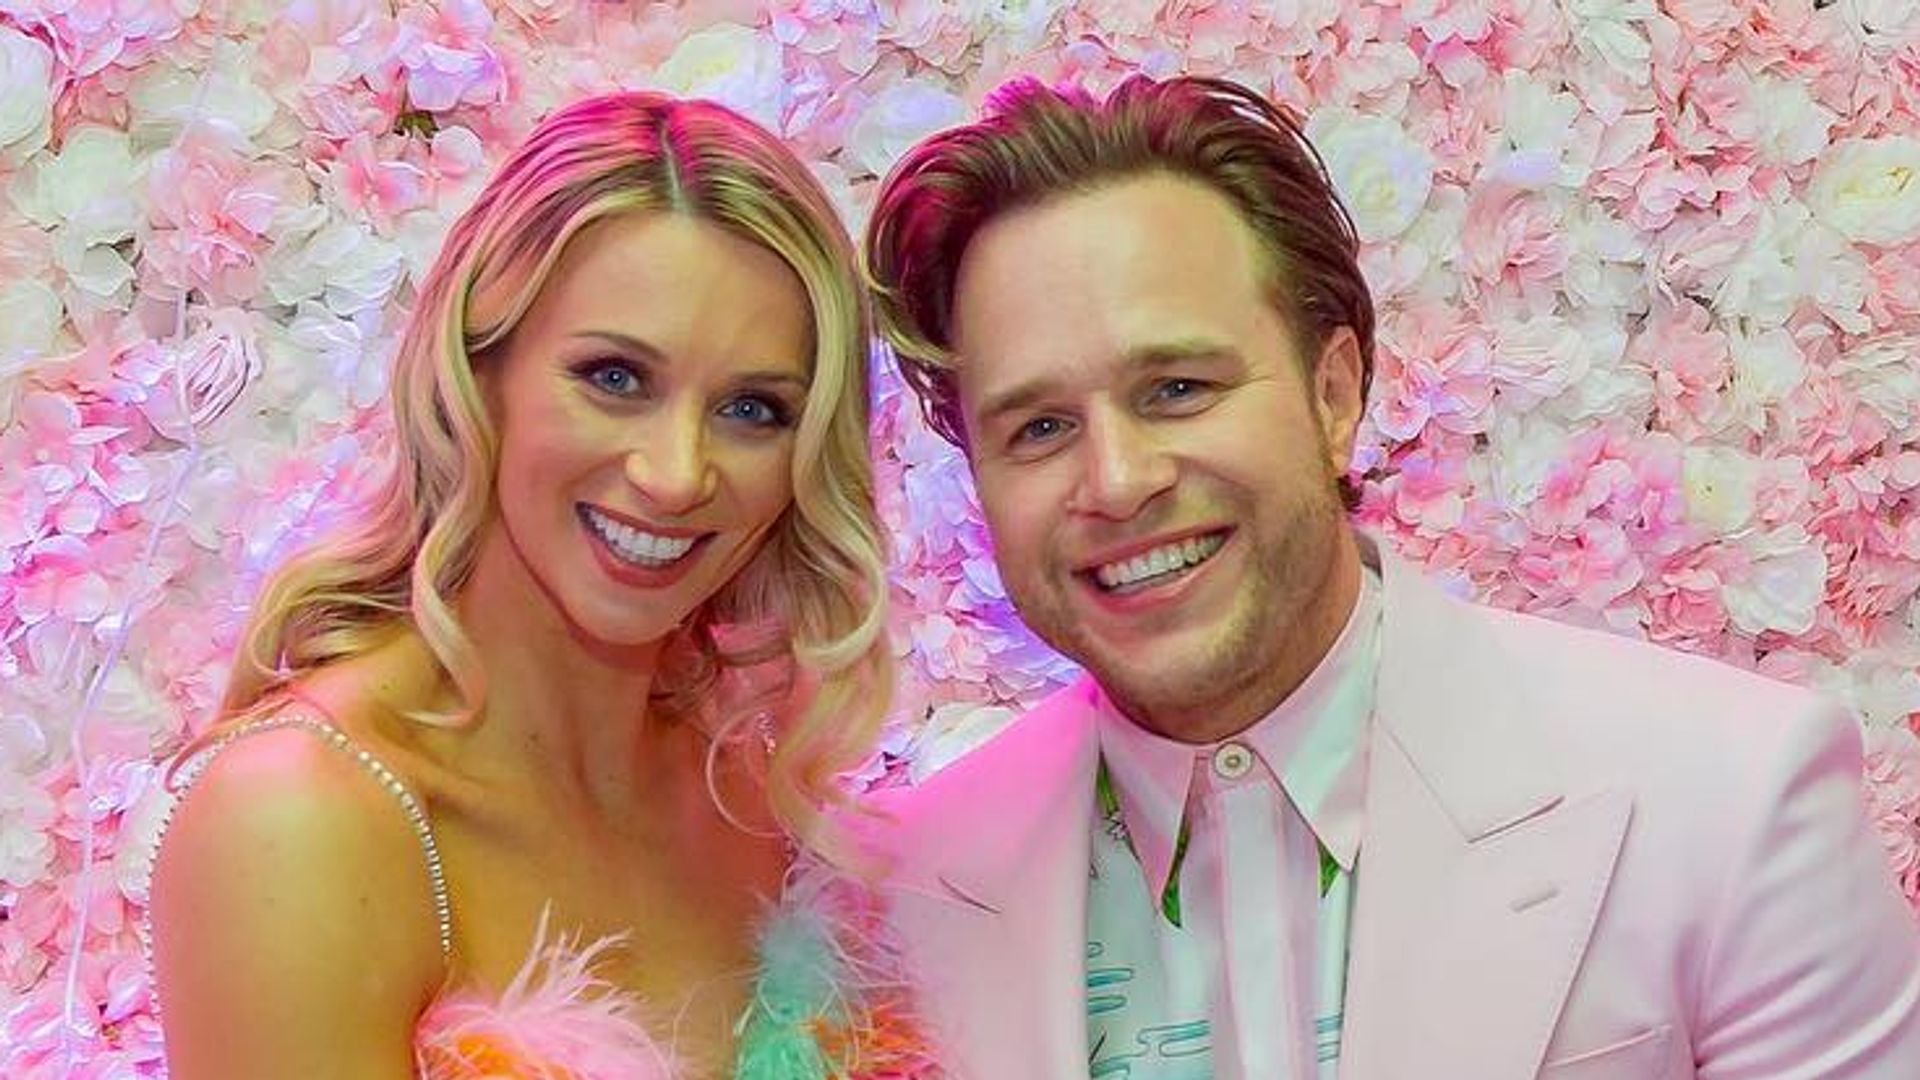 Olly Murs posing with feather dress clad fiancee Amelia Tank in front of flower wall